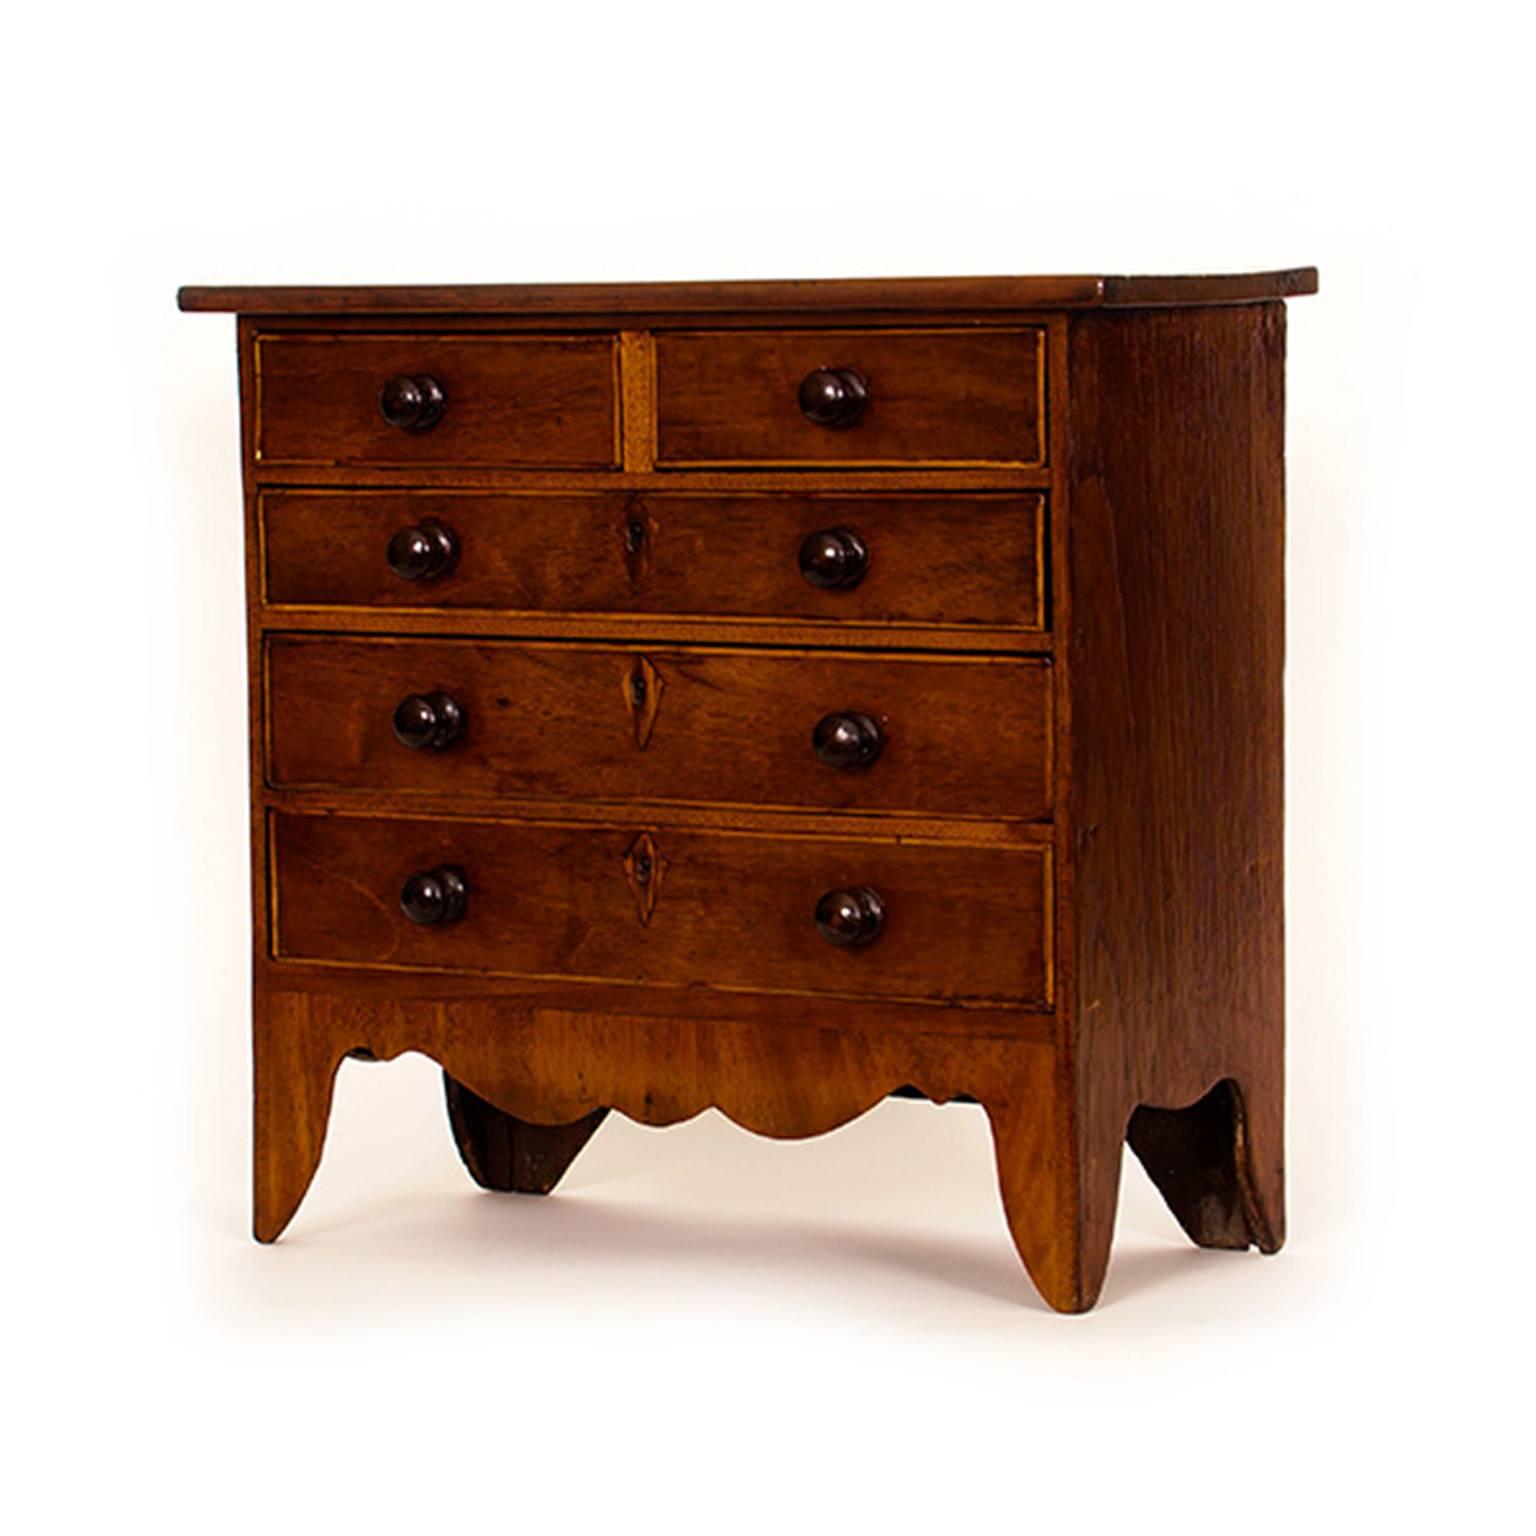 This petite chest of drawers cuts a fine and stable figure. It is country made and retains its original turned knobs.